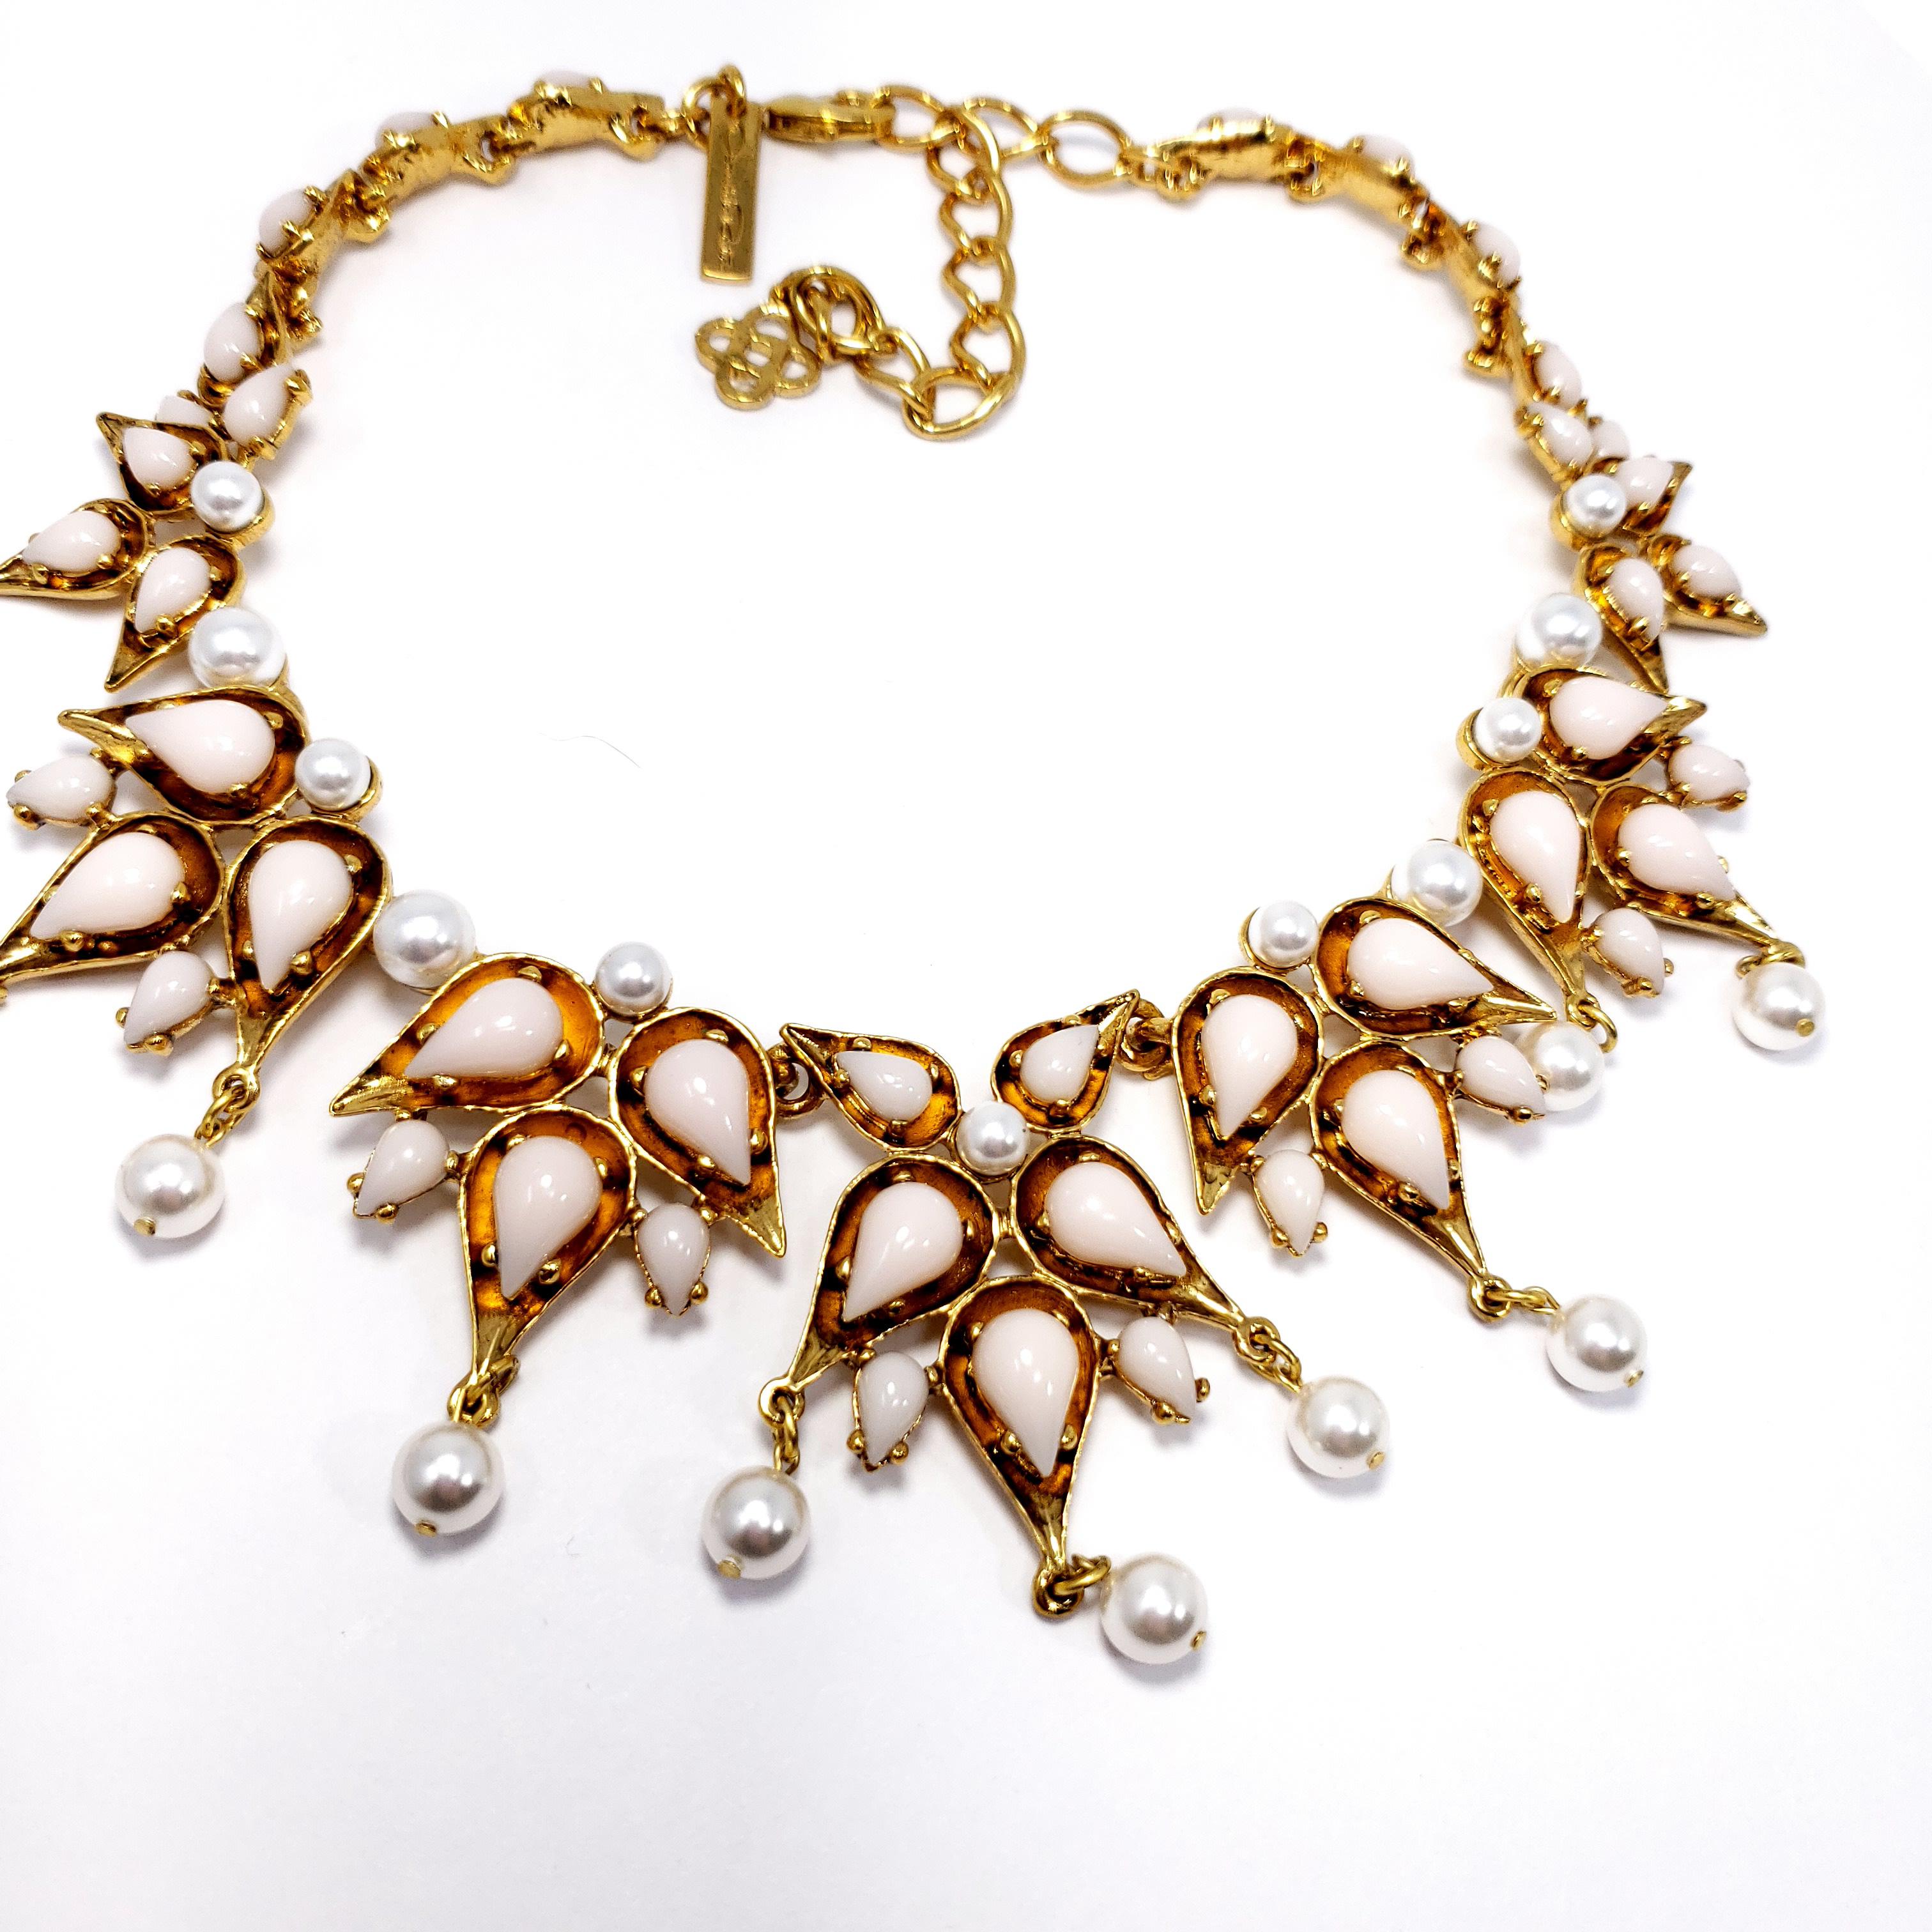 Necklace by Oscar de la Renta featuring prong-set white glass tear-drop cabochons, accented with dangling faux pearls. Set on antique 22K yellow gold plated necklace.

Hallmarks: Oscar de la Renta, Made in USA
Necklace length 38 cm / 15 in plus 8cm